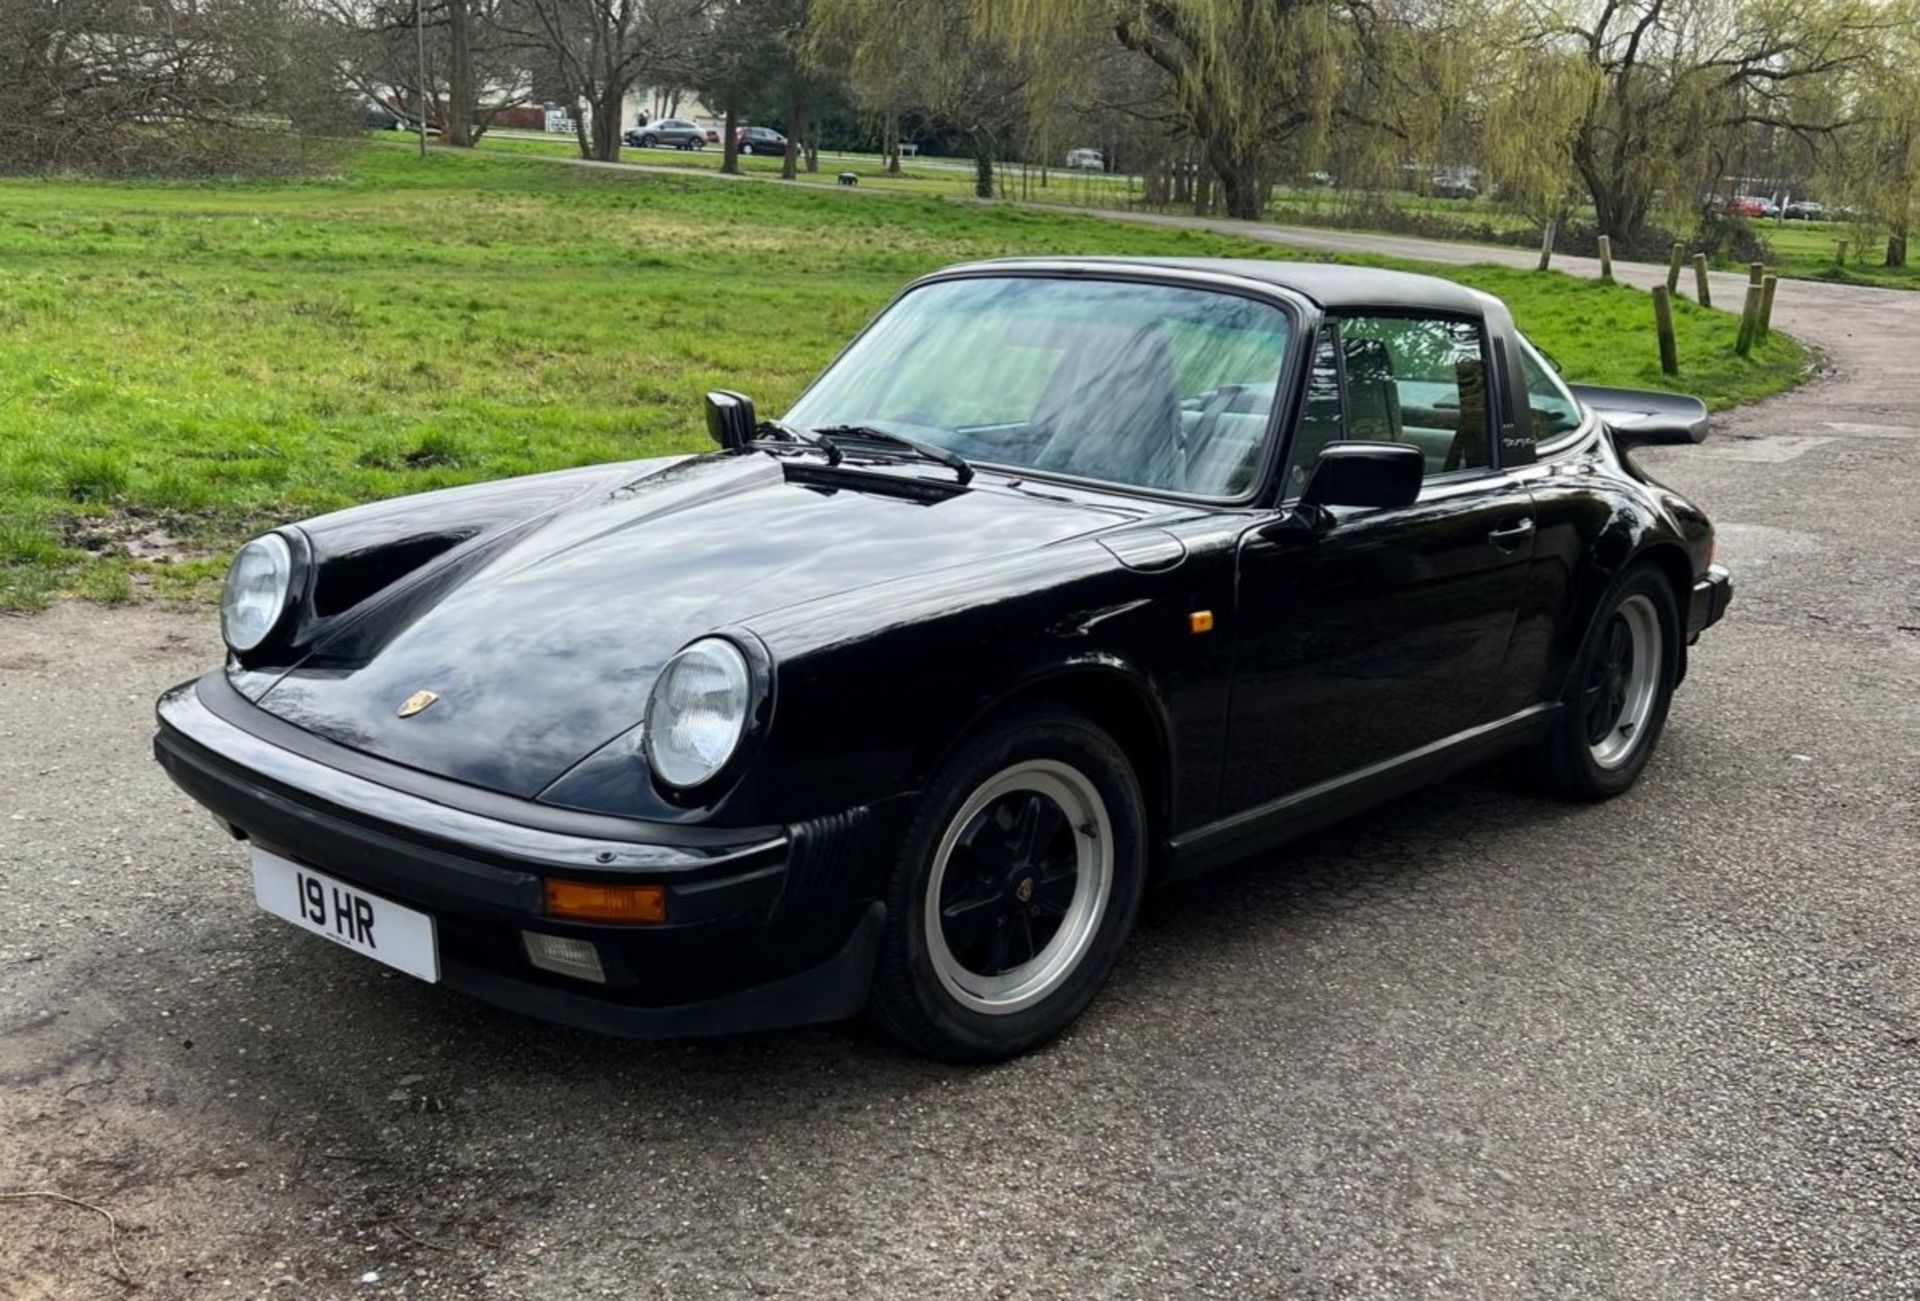 1988 Porsche Carrera Targa 3.2 - 27 yrs ownership, 61,000 miles with only 3500 miles in last 25 yrs - Image 2 of 18